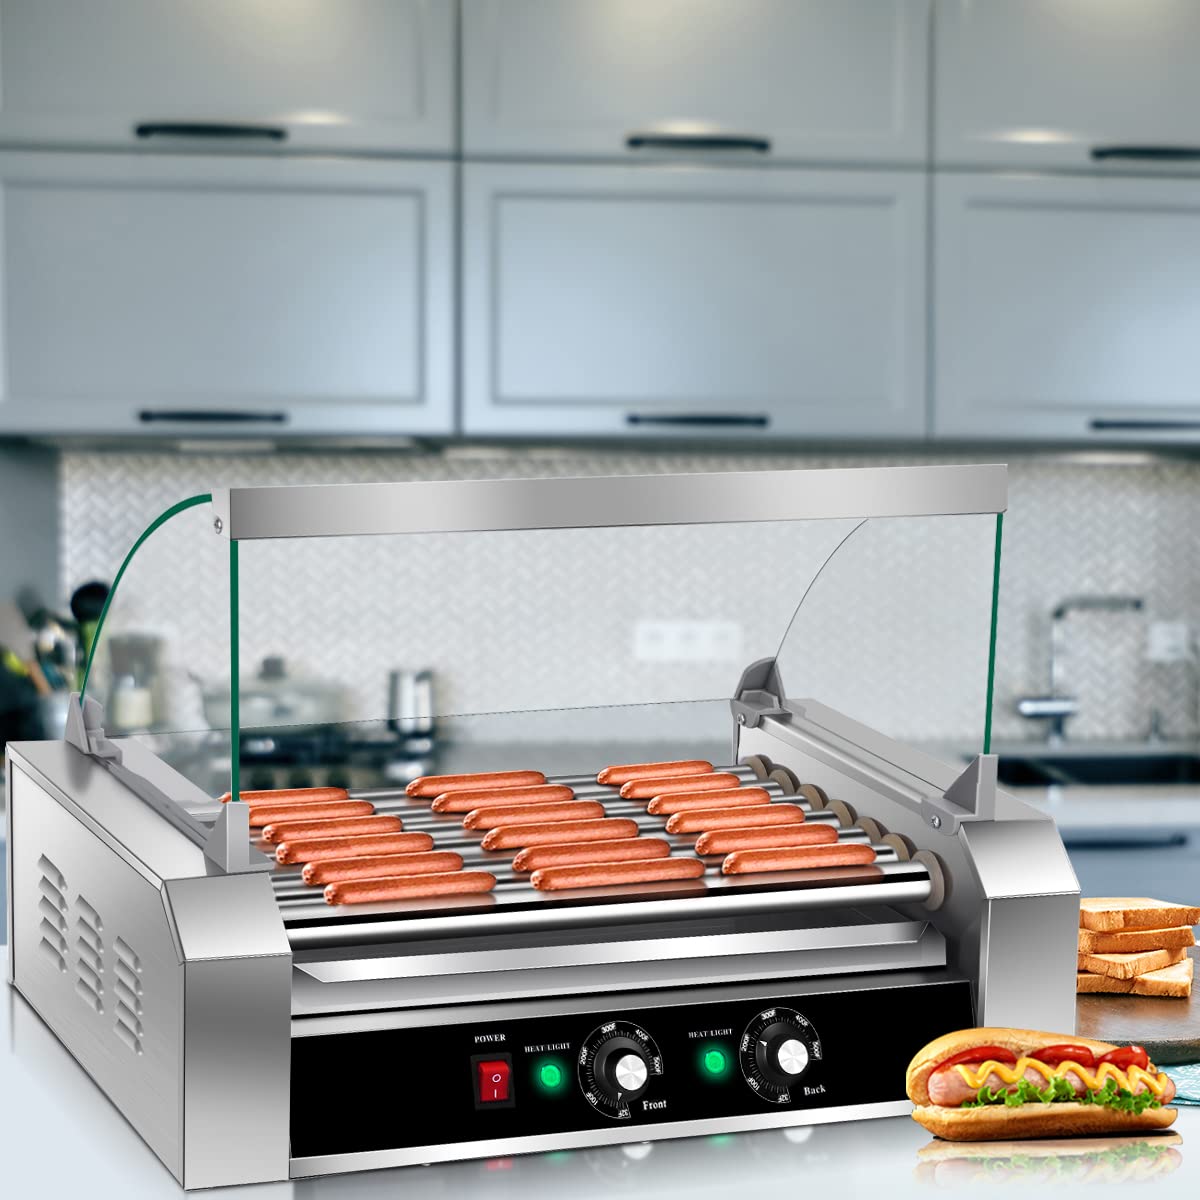 Giantex Hot Dog Roller Machine, 7 Non-Stick Rollers 18 Hot Dog Sausage Grill Cooker Machine with Removable Stainless Steel Drip Tray and Glass Hood Cover, Commercial Household Hot Dog Rotisserie